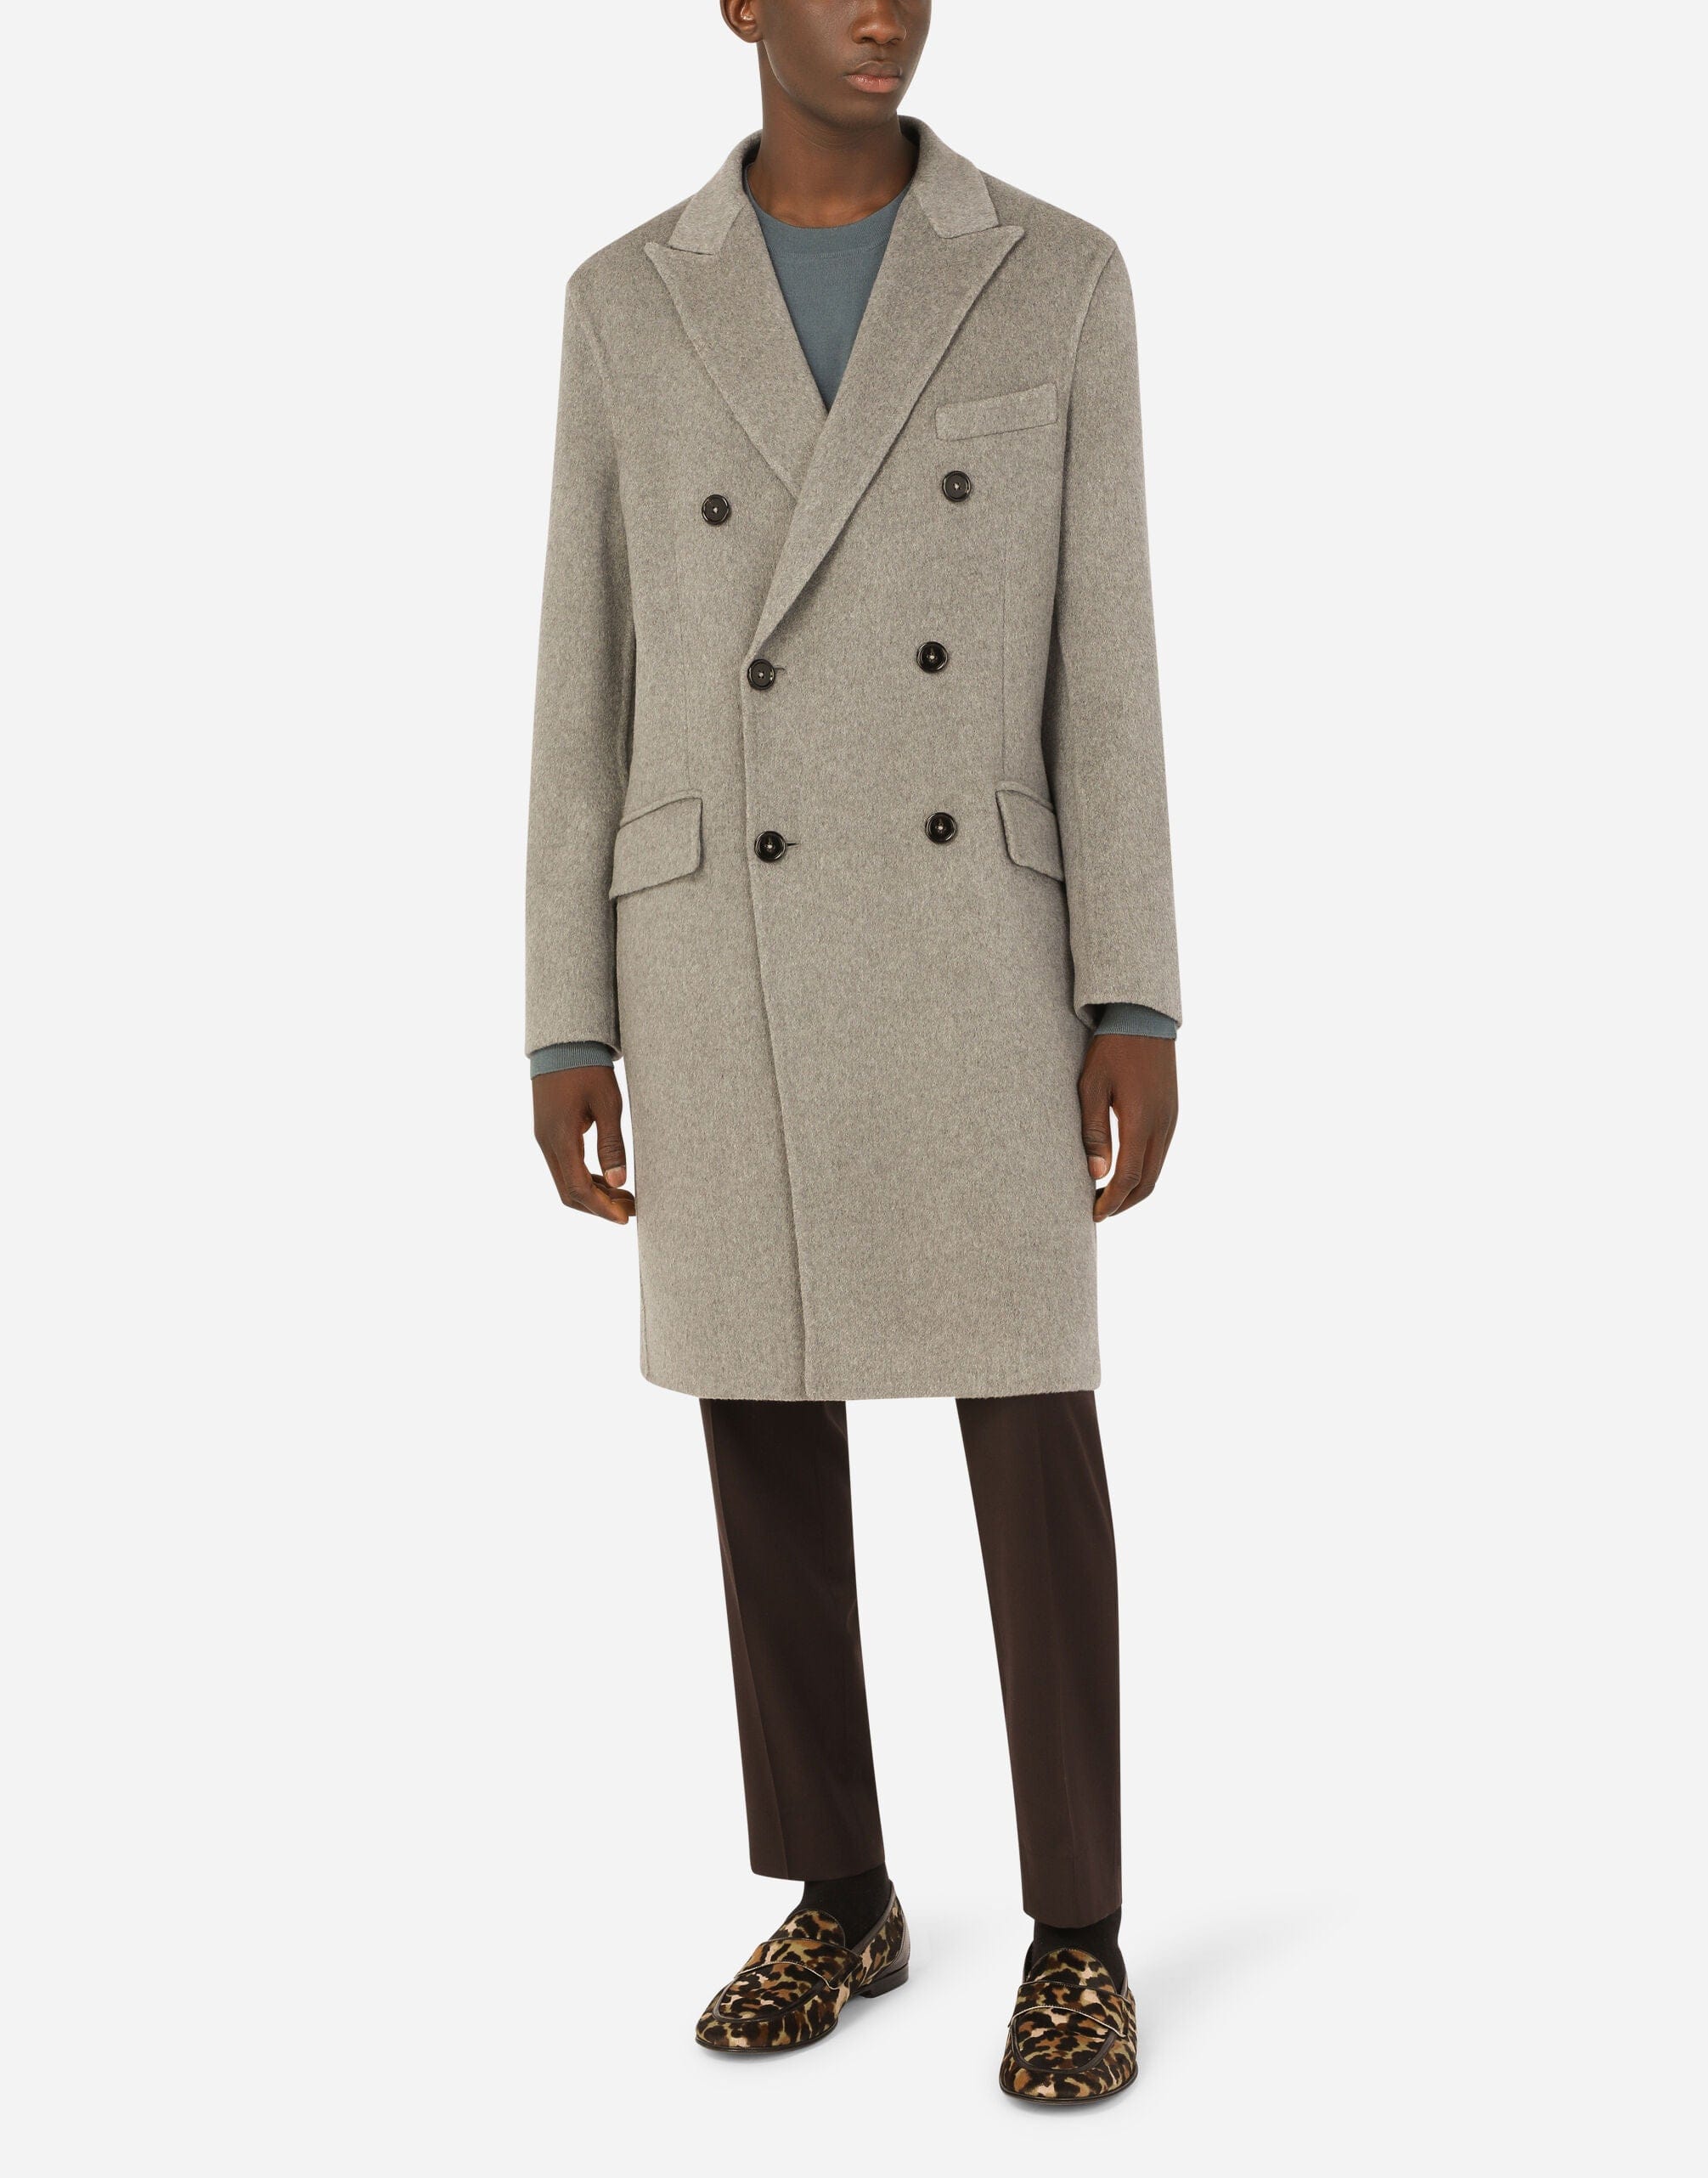 Dolce & Gabbana Double-Breasted Double Cashmere Coat